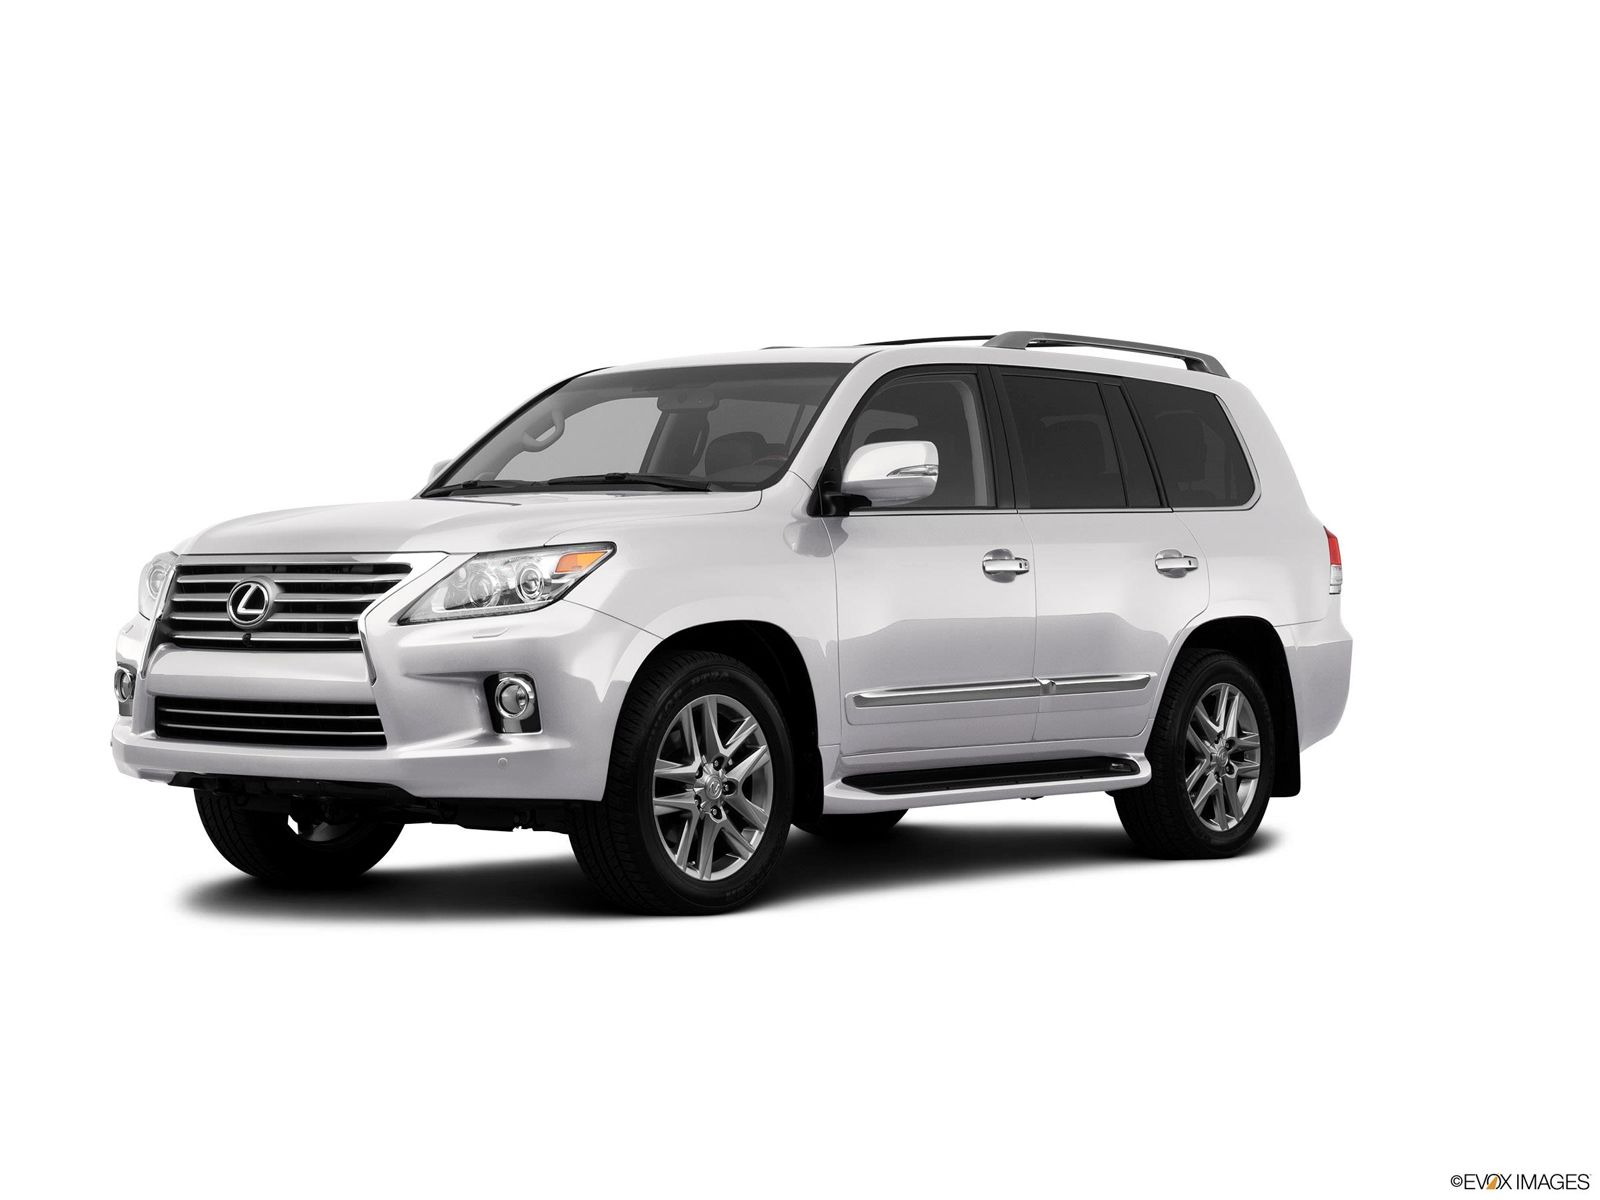 2013 Lexus LX 570 Research, Photos, Specs and Expertise | CarMax